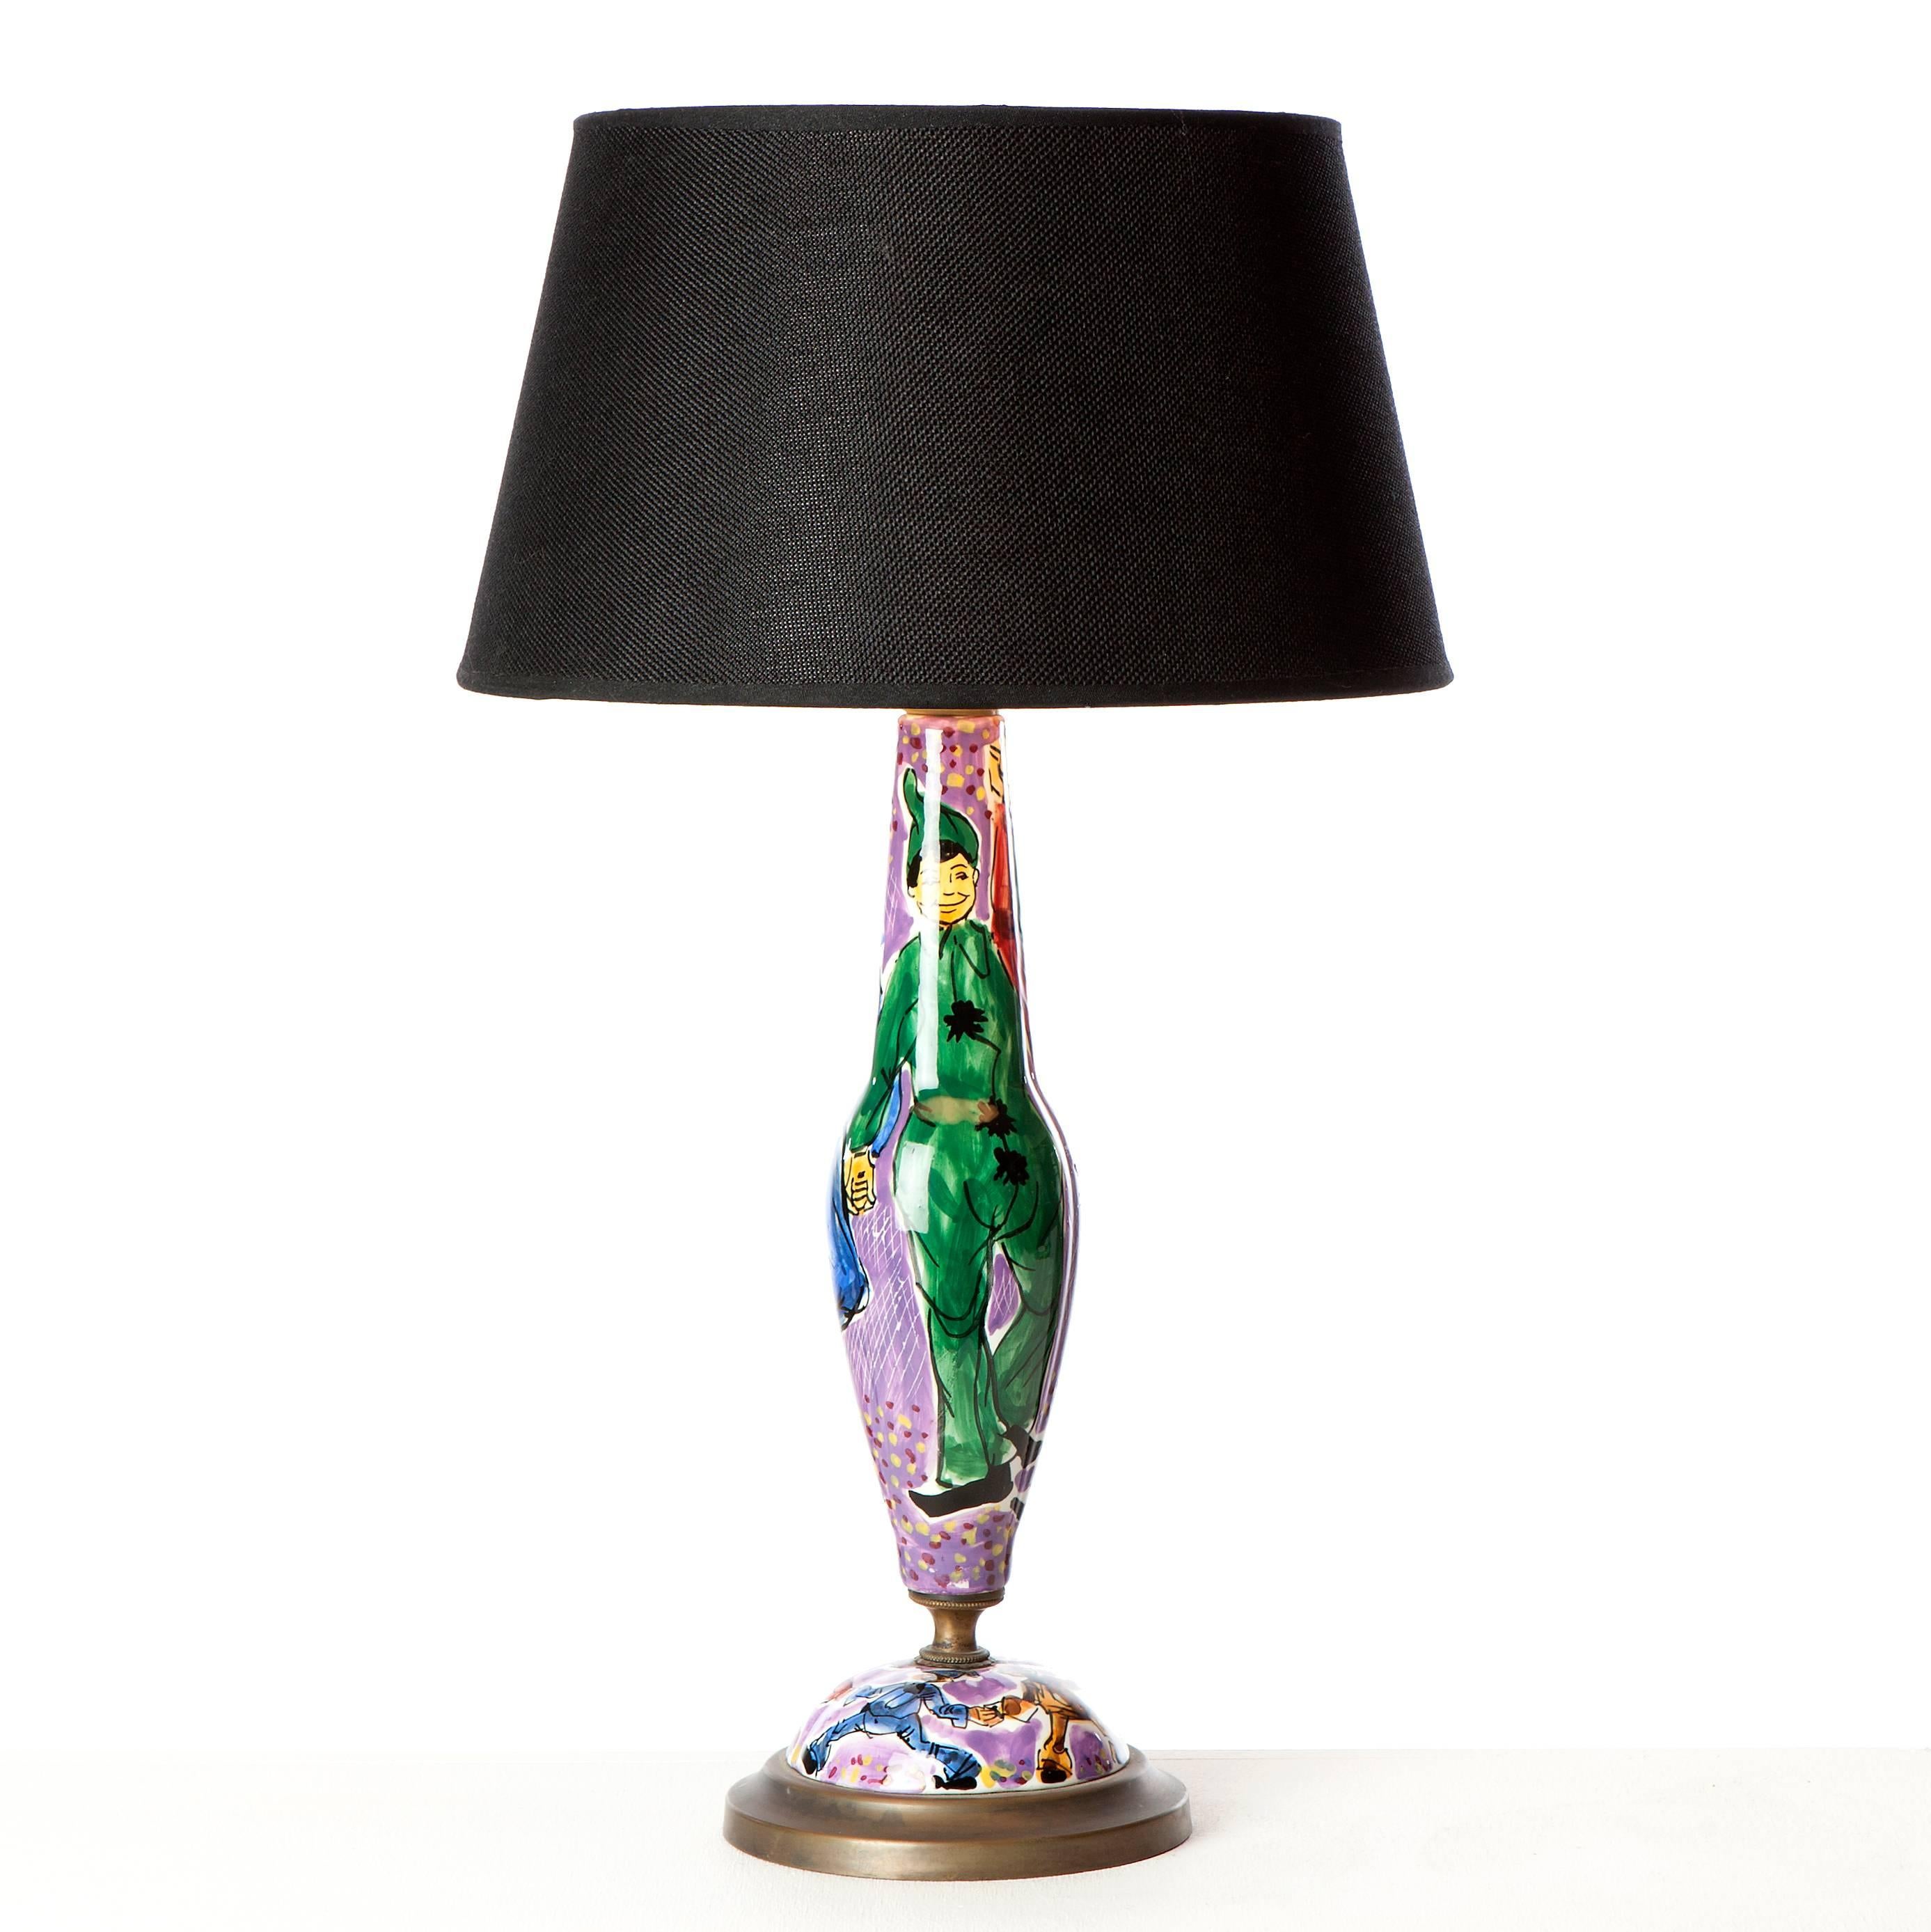 The lamp comes without shade.
Measures: Height 42cm, diameter 15cm.